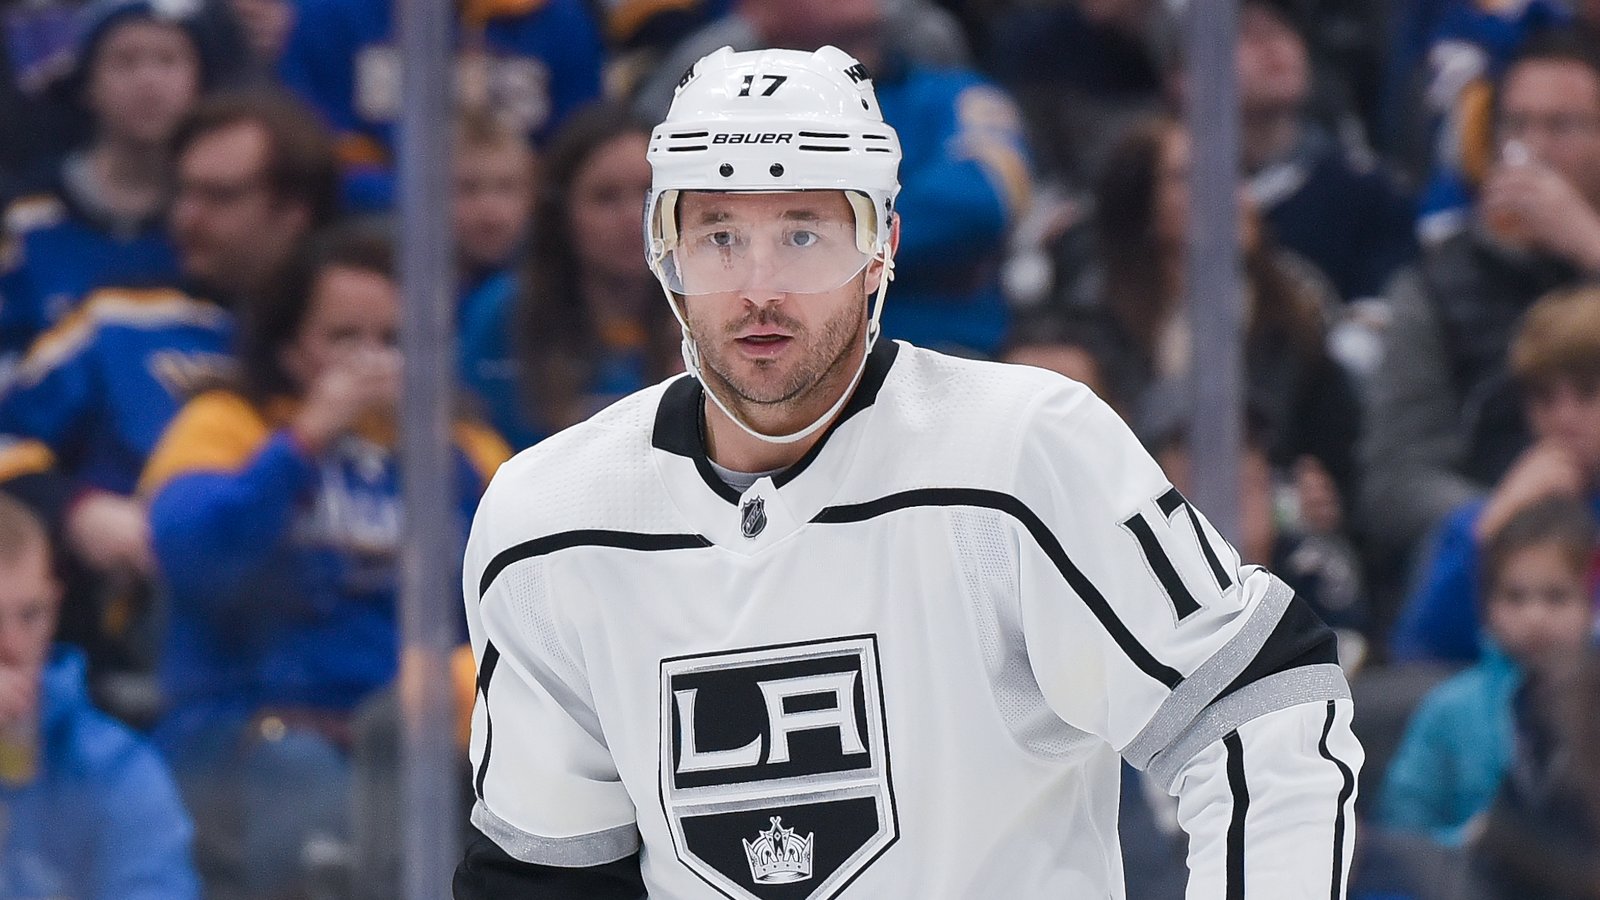 Could Ilya Kovalchuk be a fit for the Bruins?